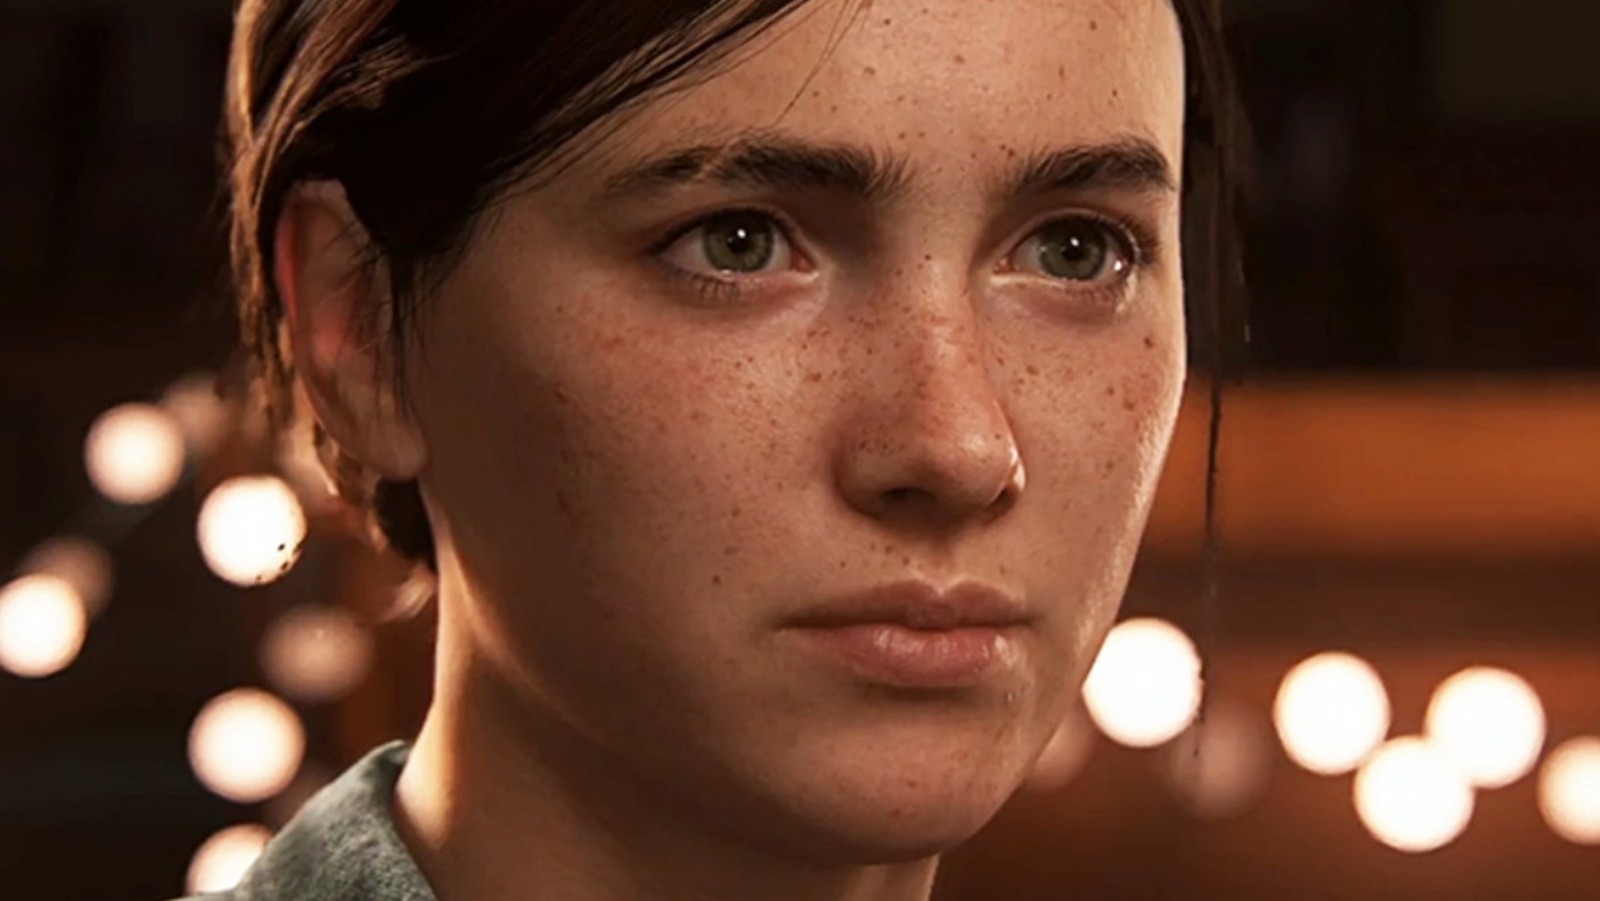 How Tess dies in Last of Us show is totally different in the game - Polygon